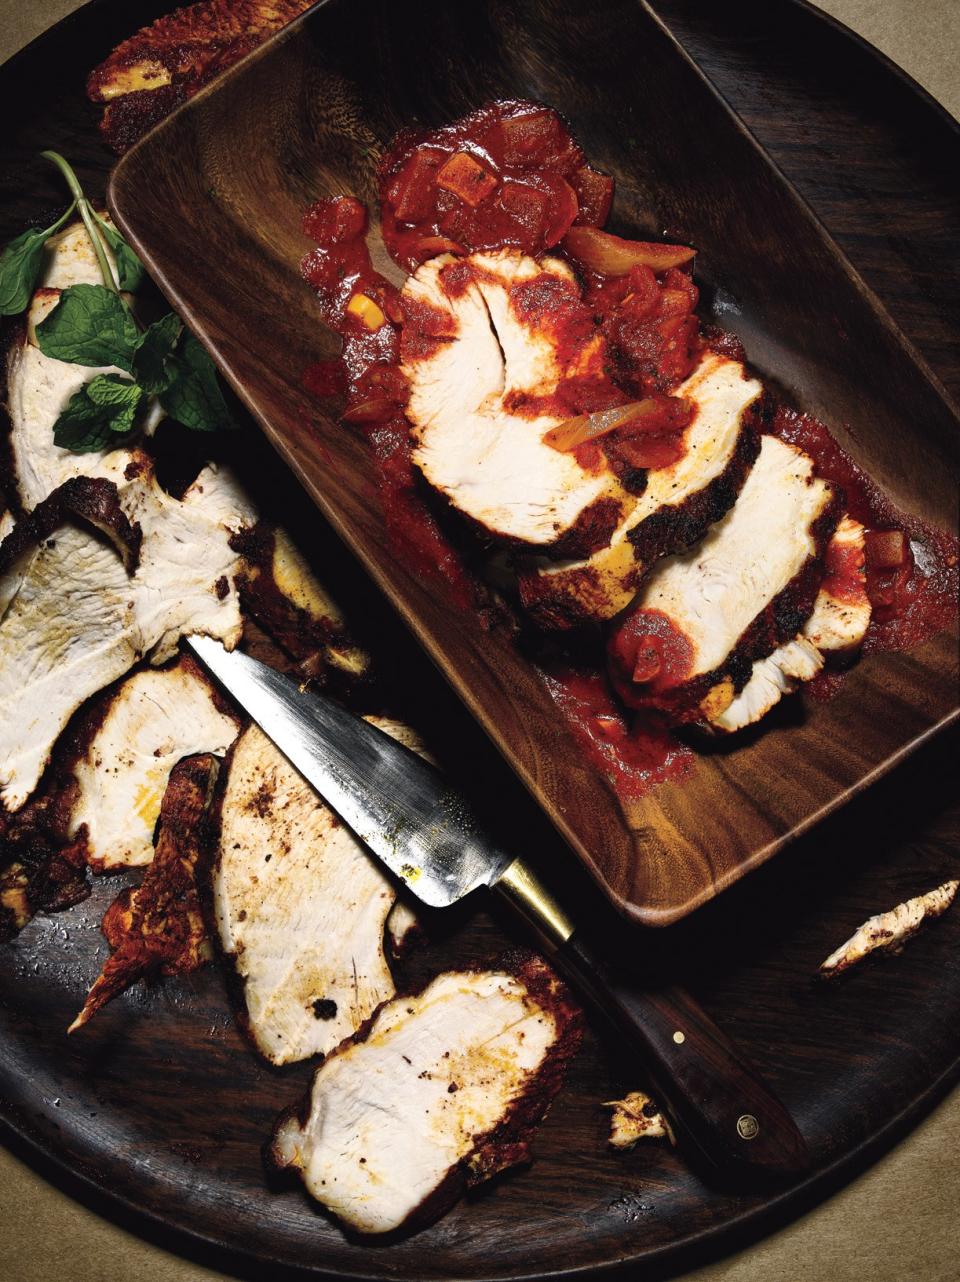 Achiote-Grilled Turkey Breast with Tomatoes, Chiles, and Mint